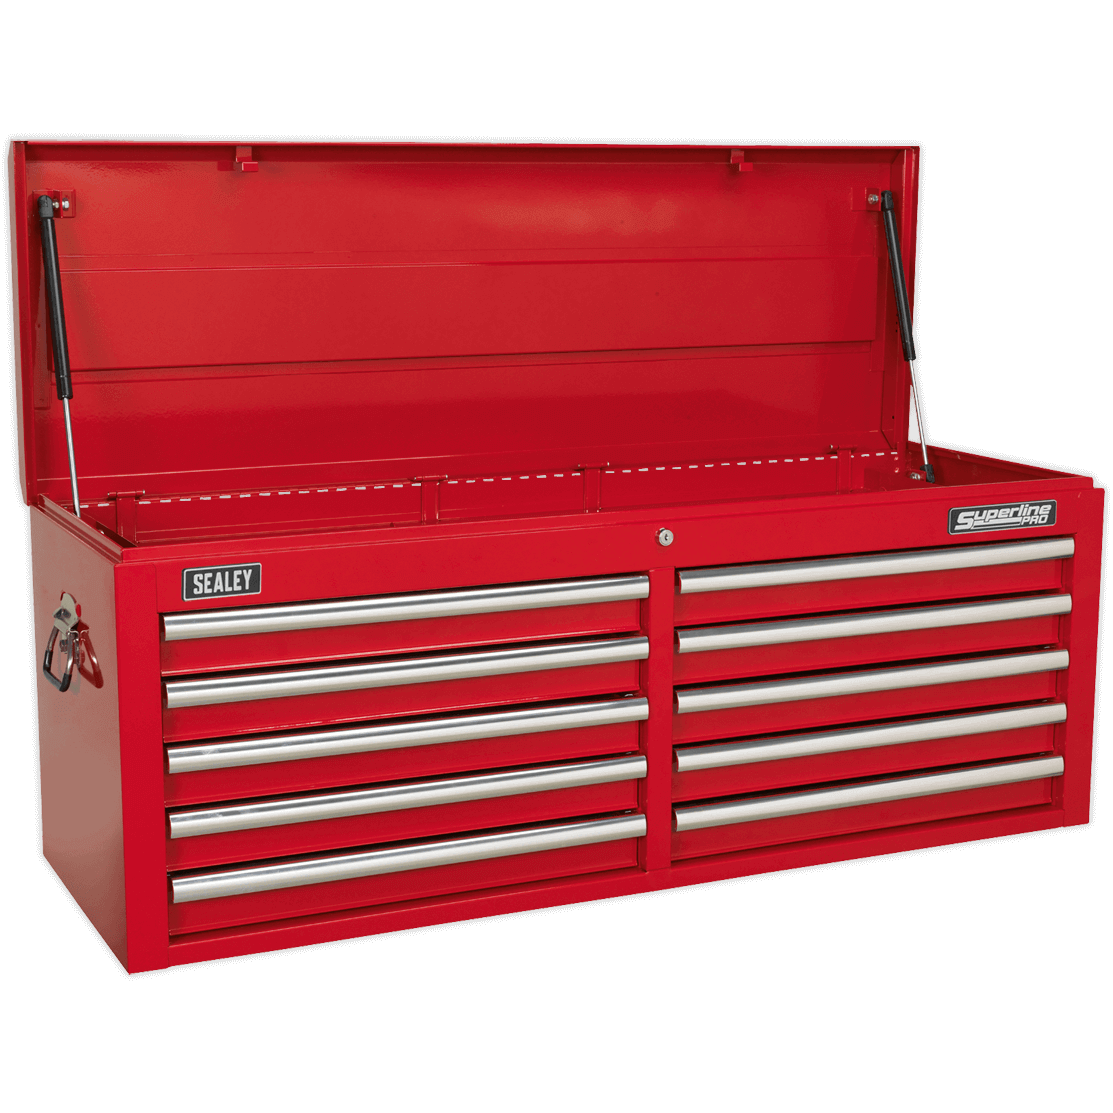 Sealey Superline Pro 10 Drawer Heavy Duty Tool Chest Red